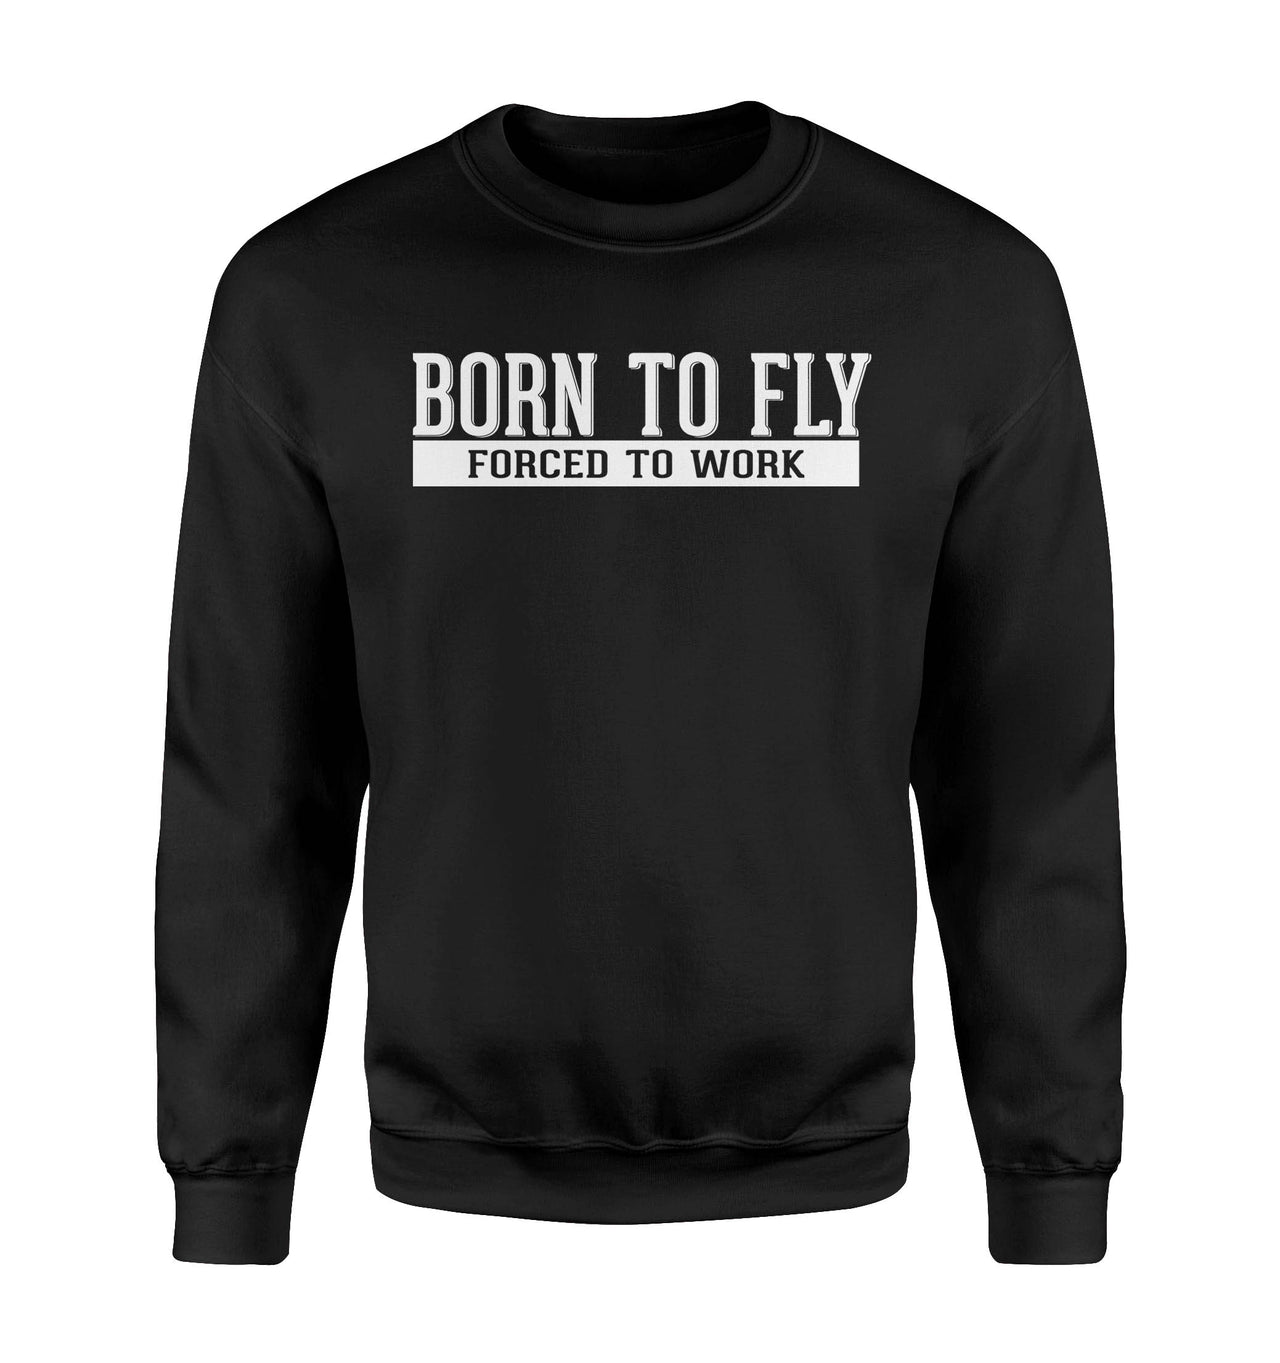 Born To Fly Forced To Work Designed Sweatshirts